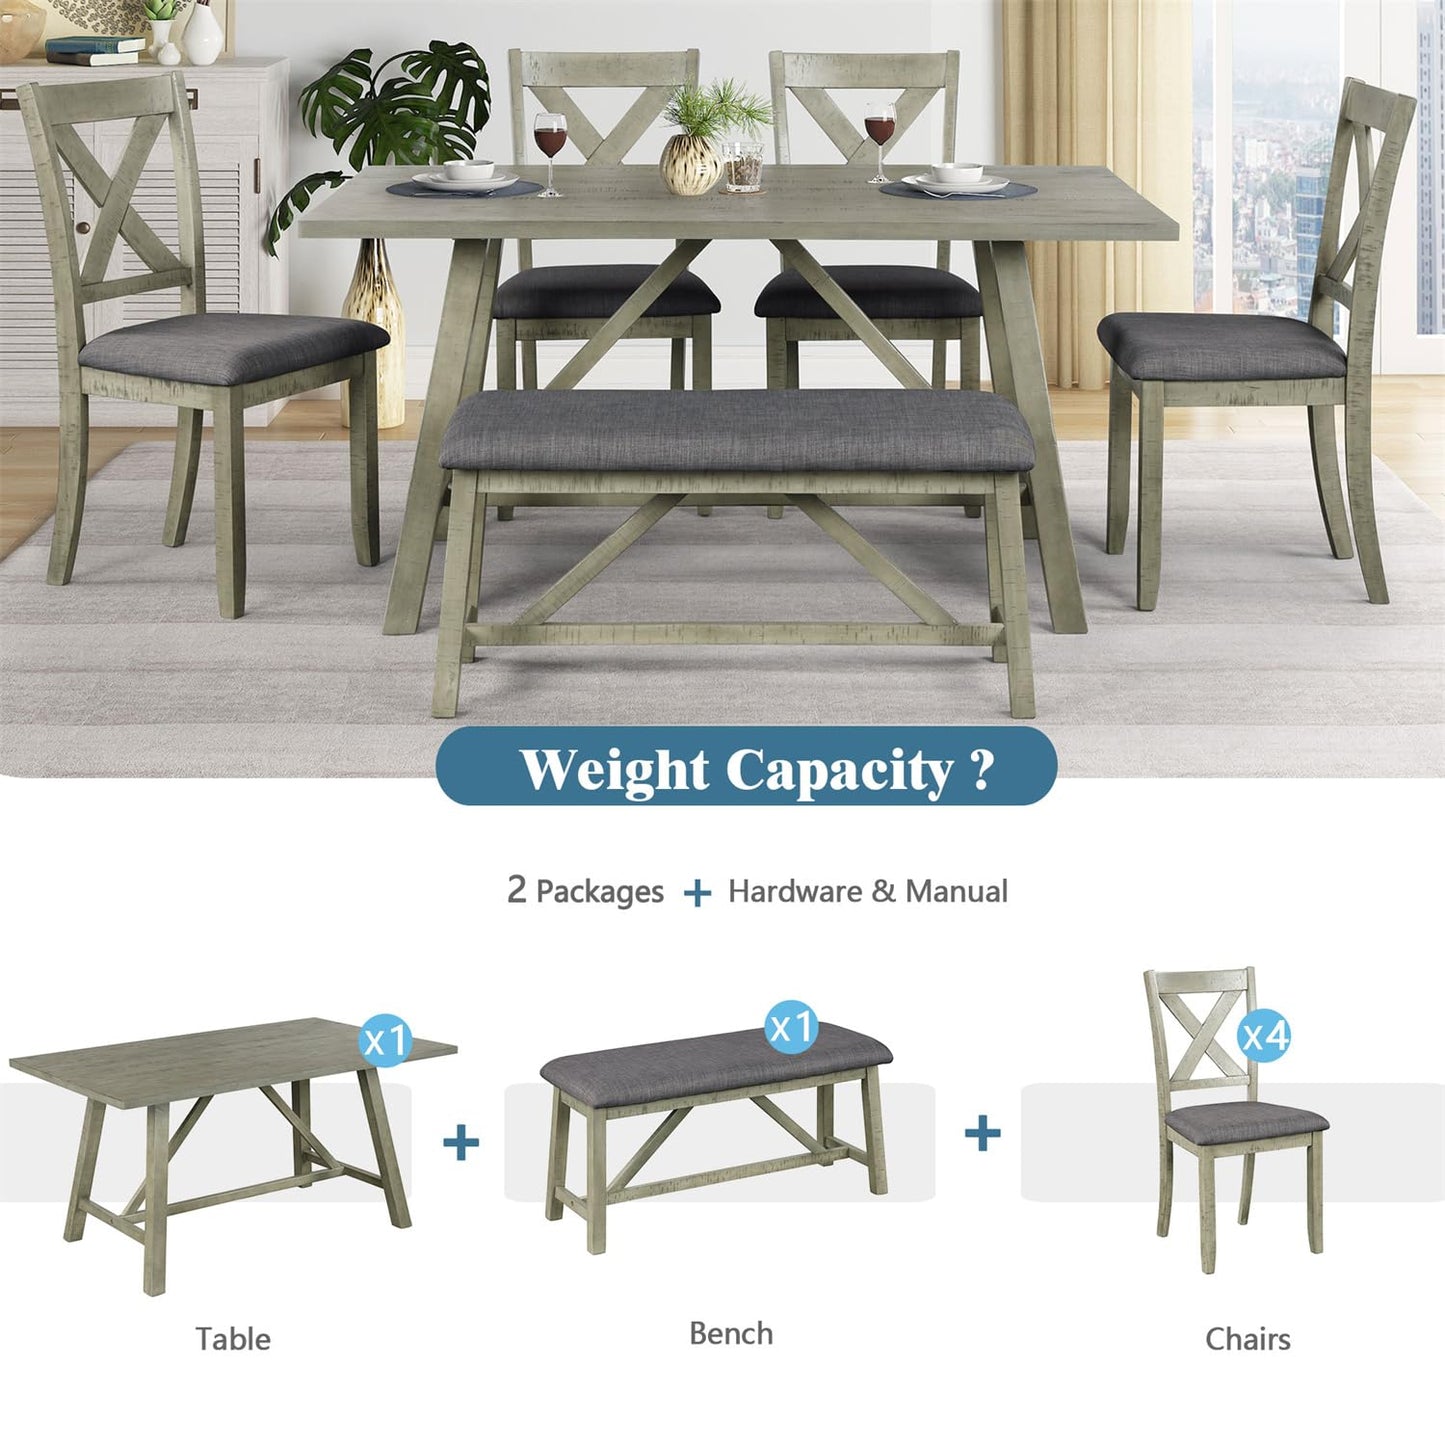 Harper & Bright Designs 6Pcs Dining Table Set with 4 Upholstered Chairs and Bench, Solid Wood Dining Set for Kichen, Dining Room, Rustic Gray+Gray Cushion